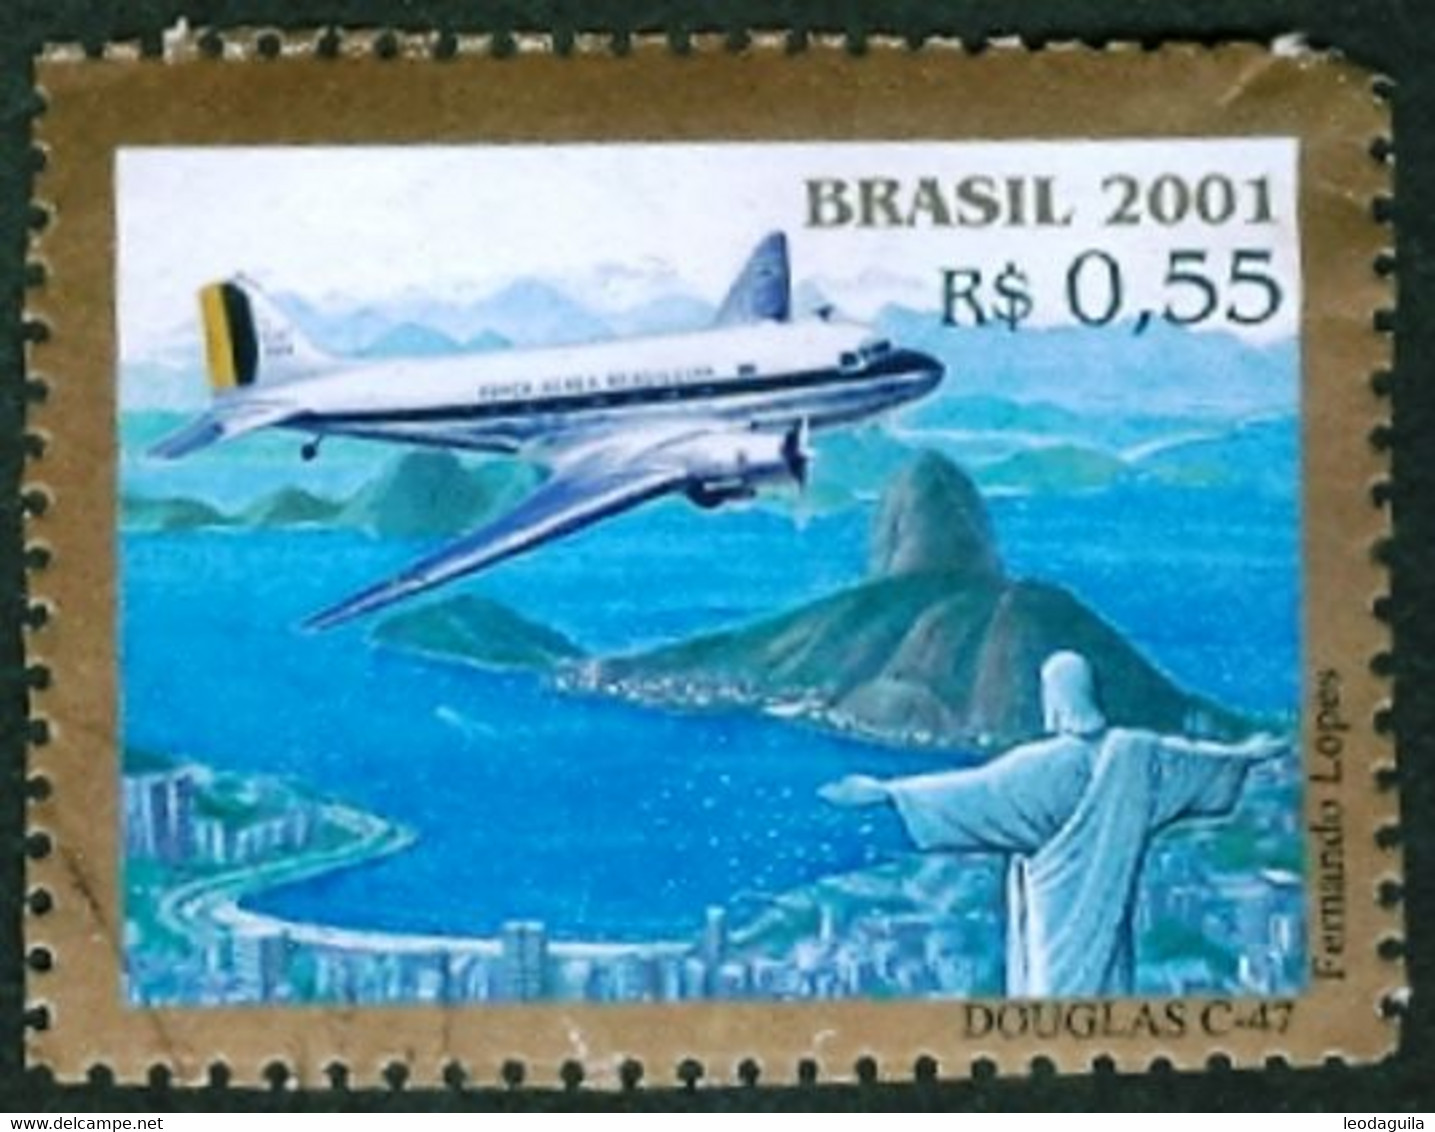 BRAZIL #2411  - PIONEER AVIATION  AIRCRAFT  - DOUGLAS DC 6  - 2001 - Used Stamps